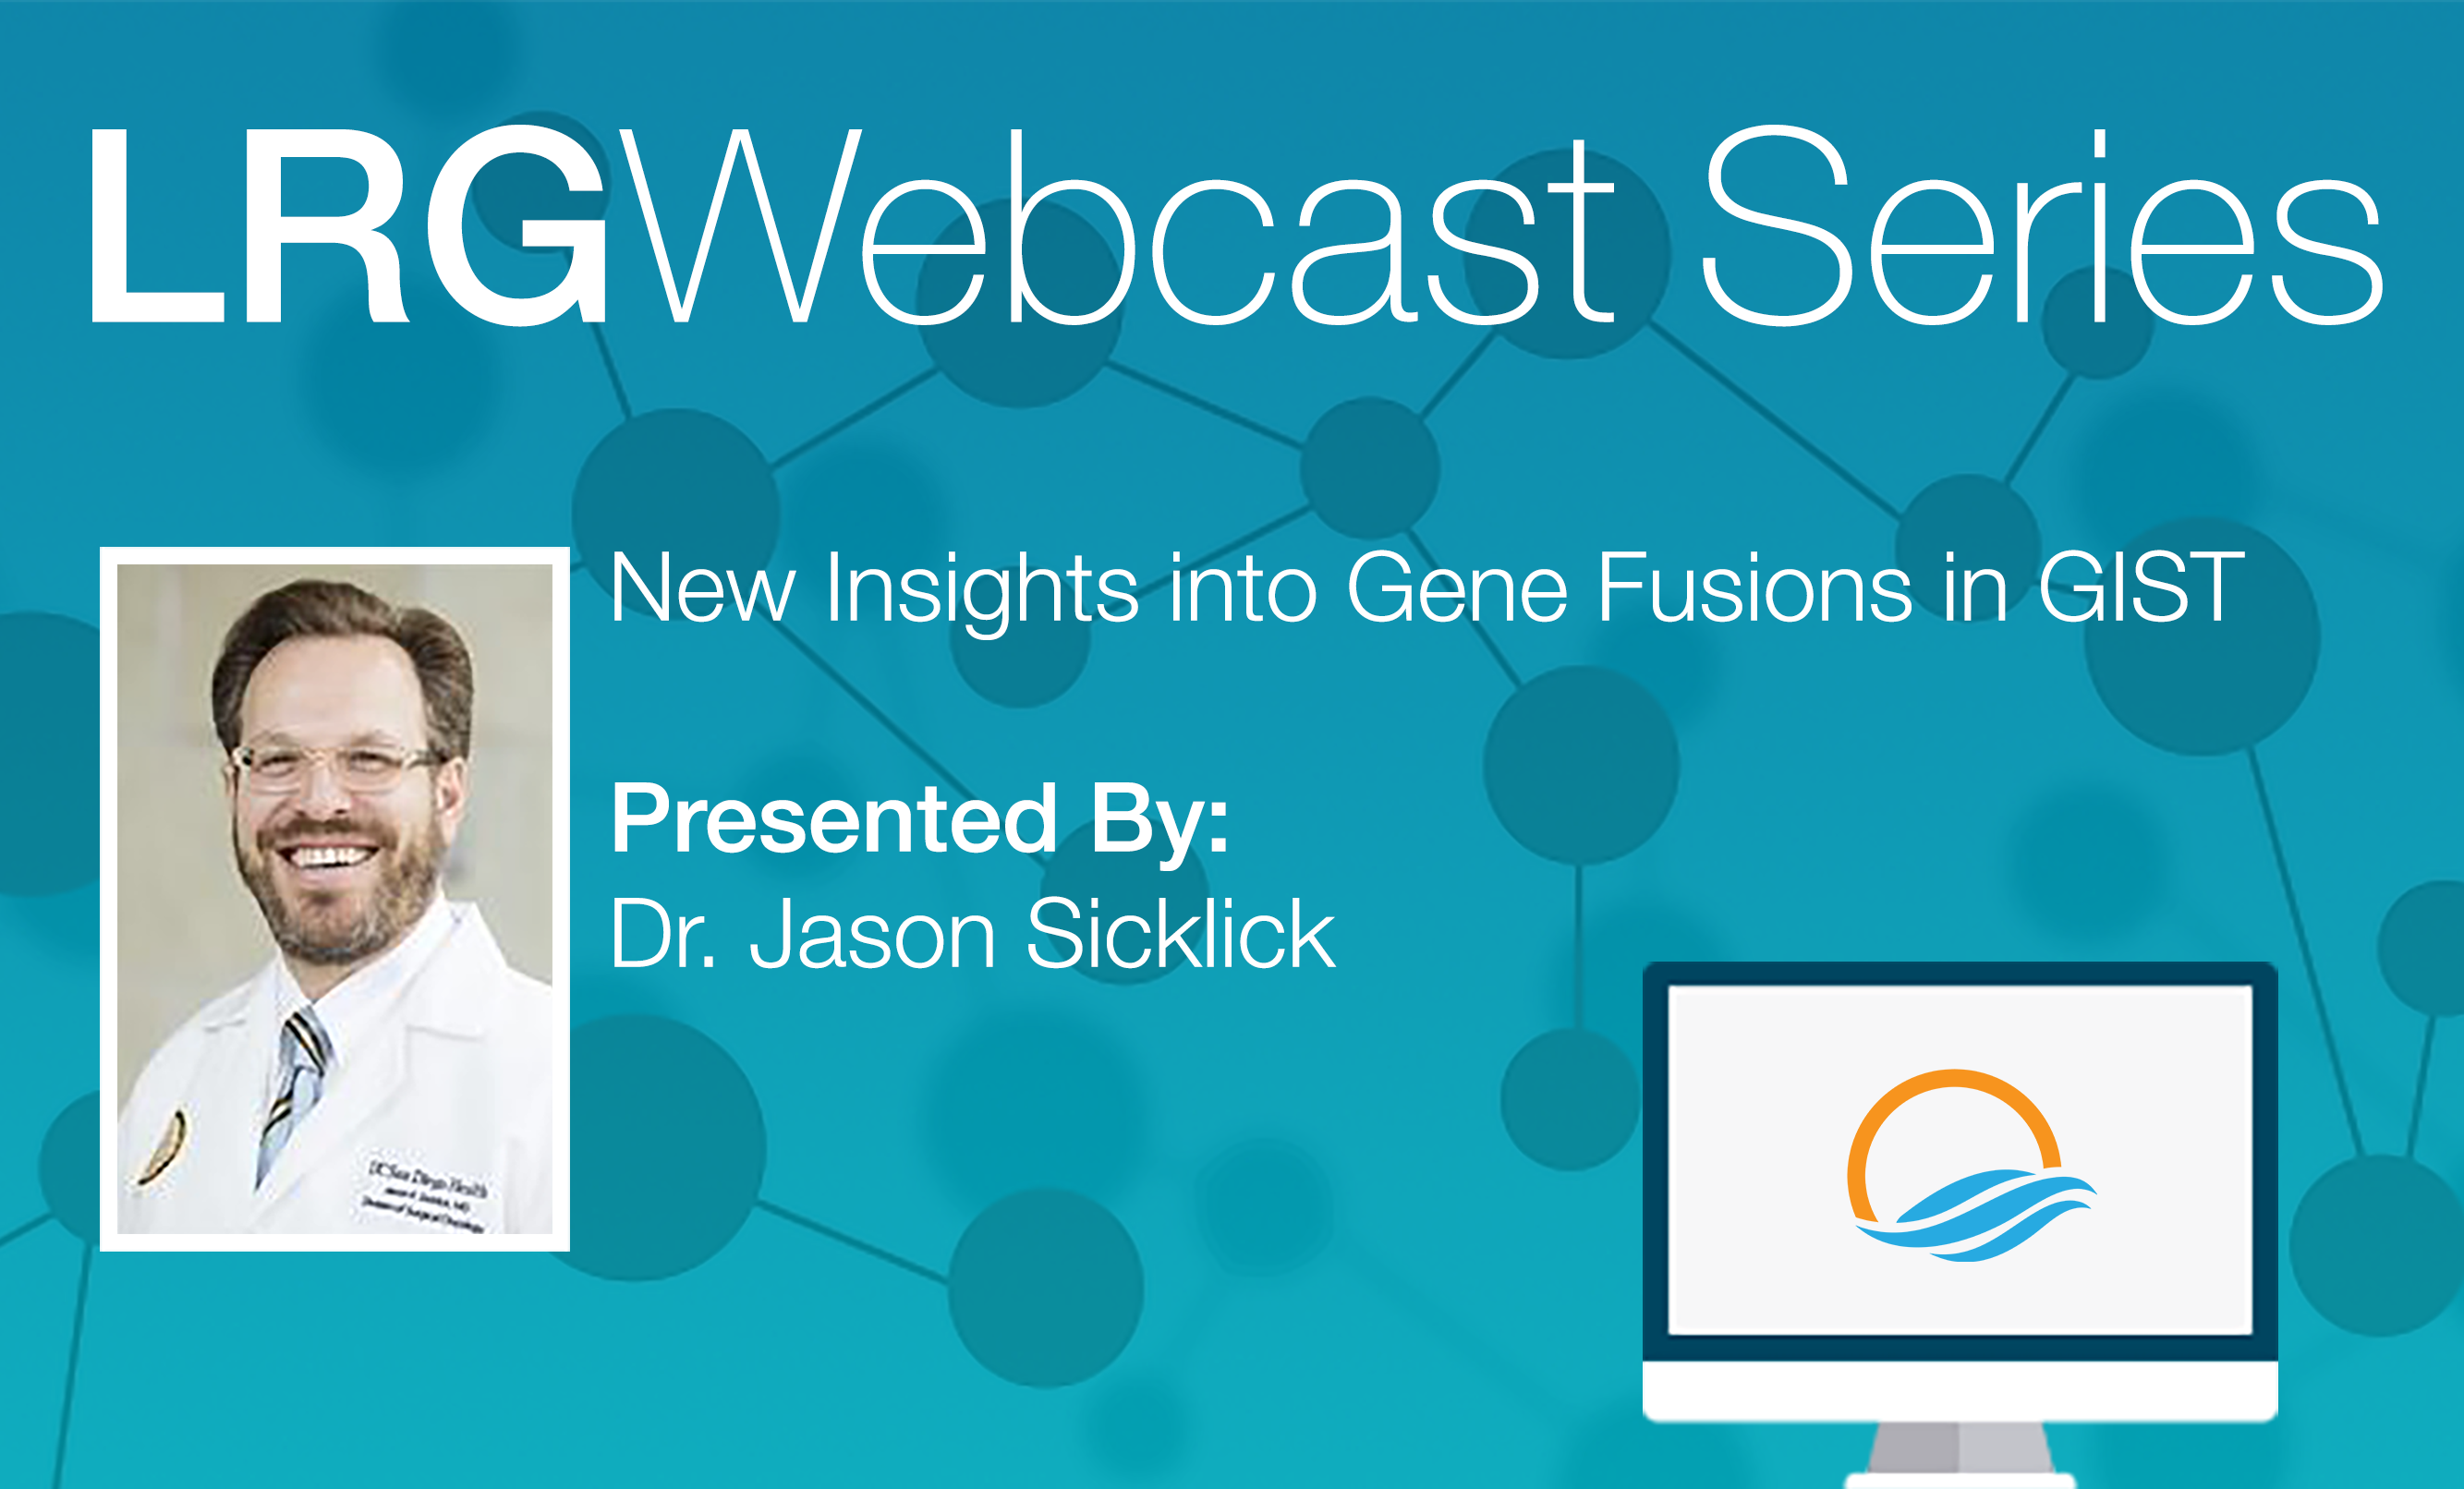 Dr. Sicklick's Webcast on Gene Fusions